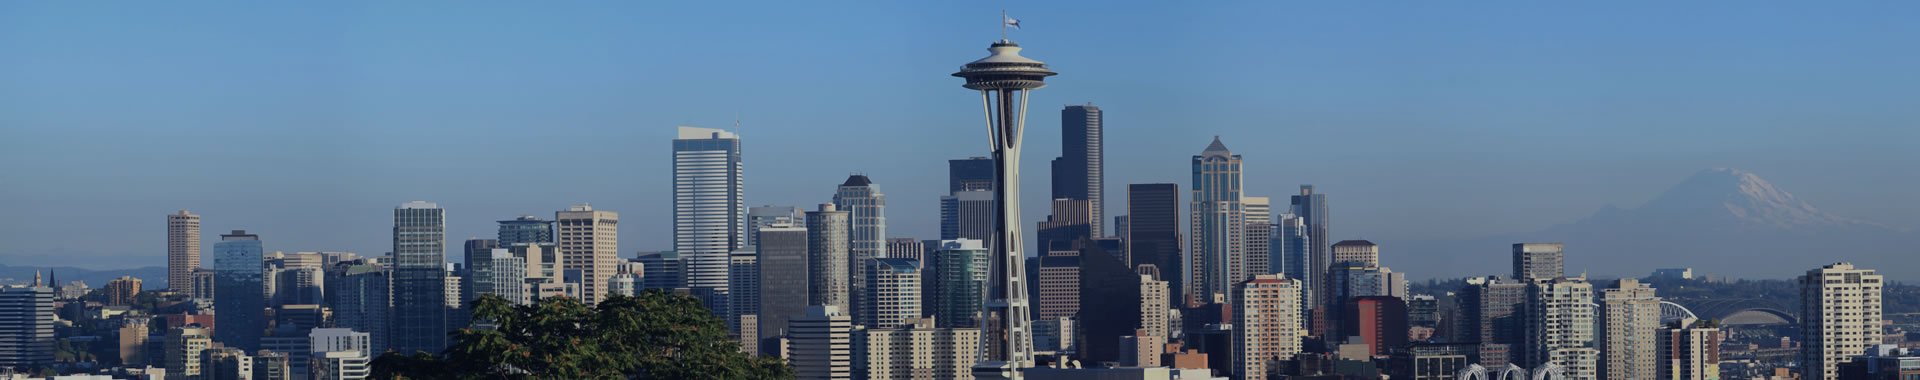 Photo of downtown Seattle view of the Space Needle.